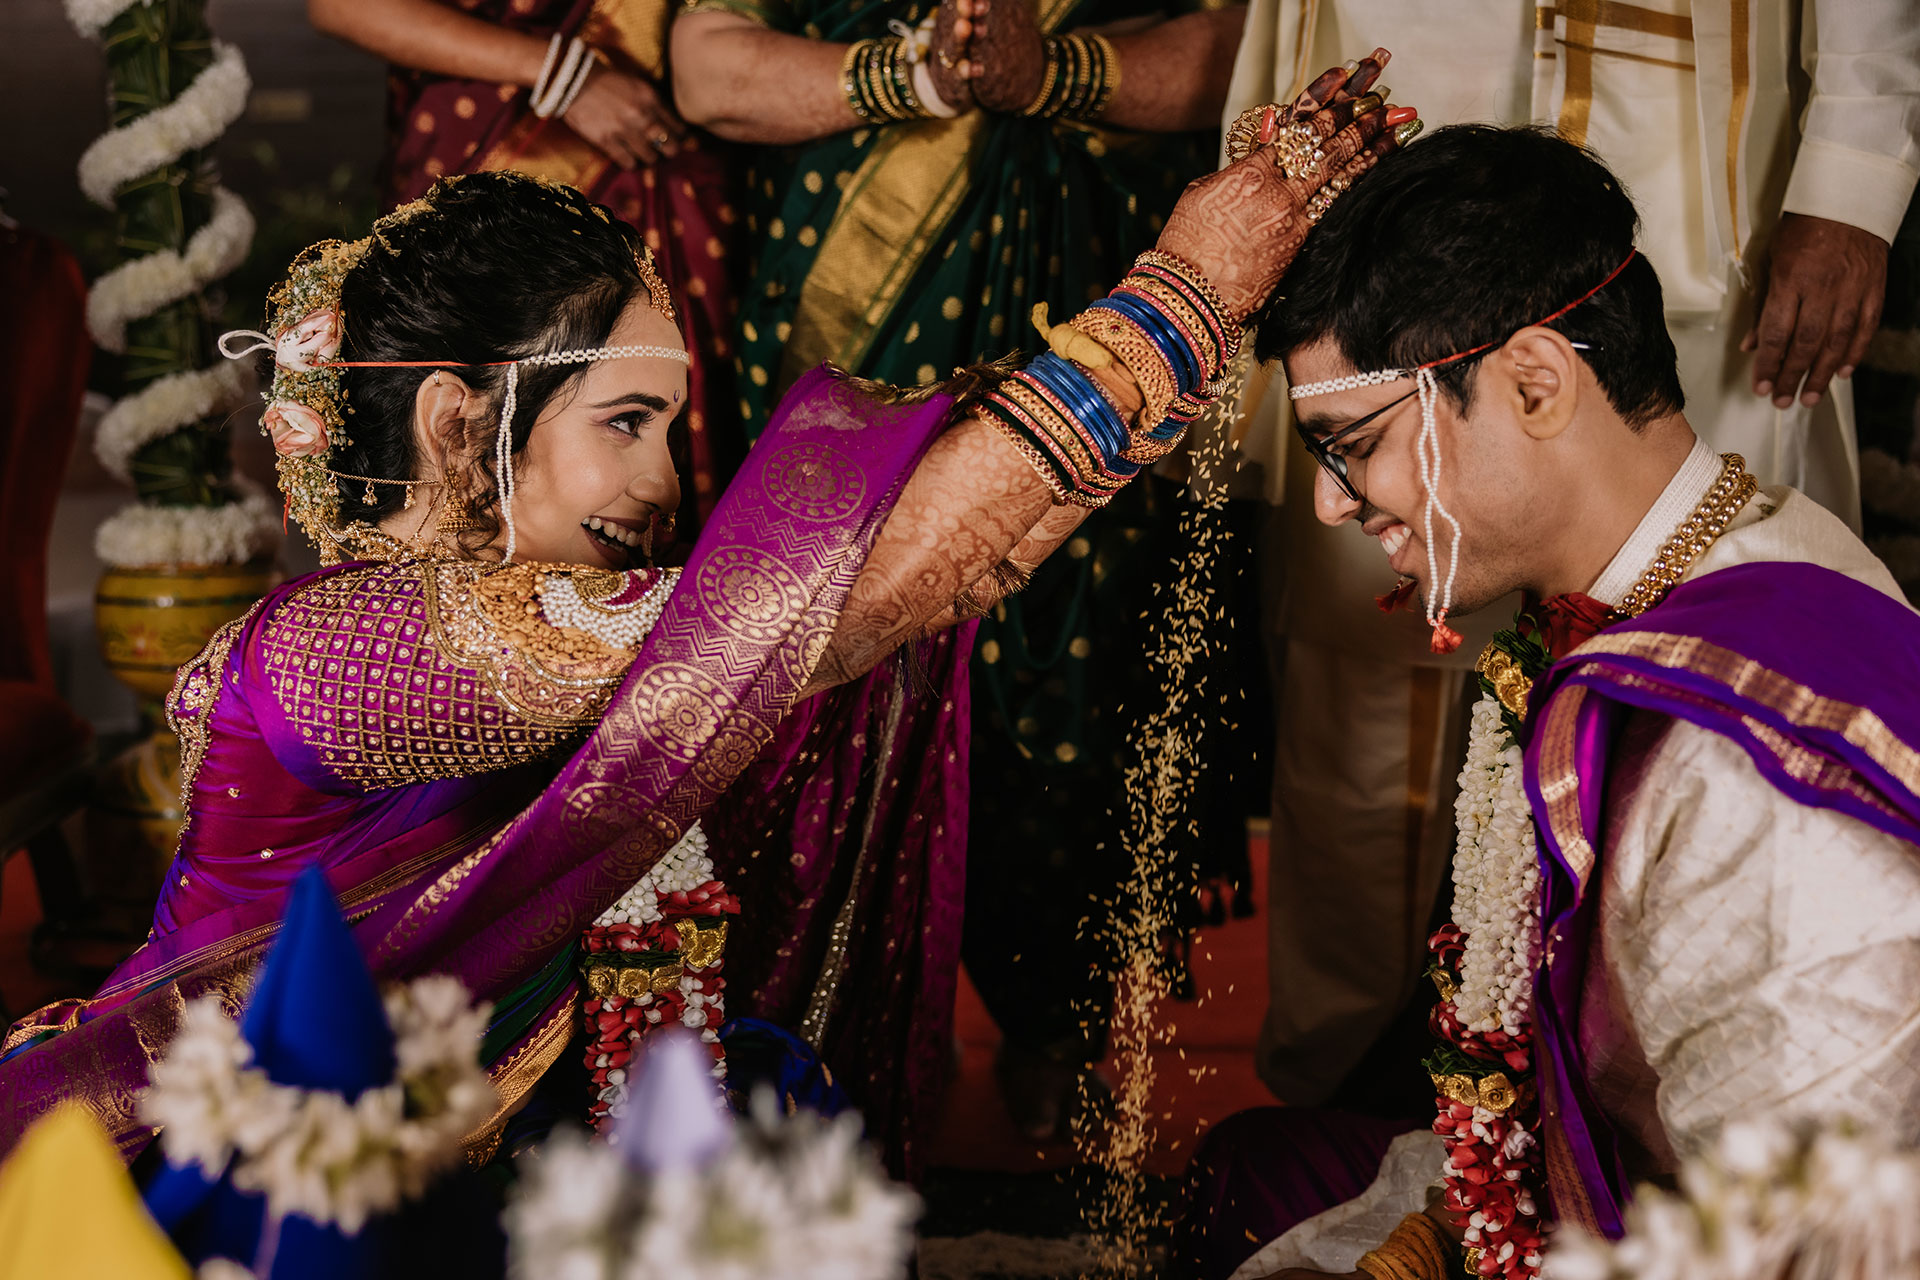 Best Wedding Photography Bride Poses Indian - Red Veds